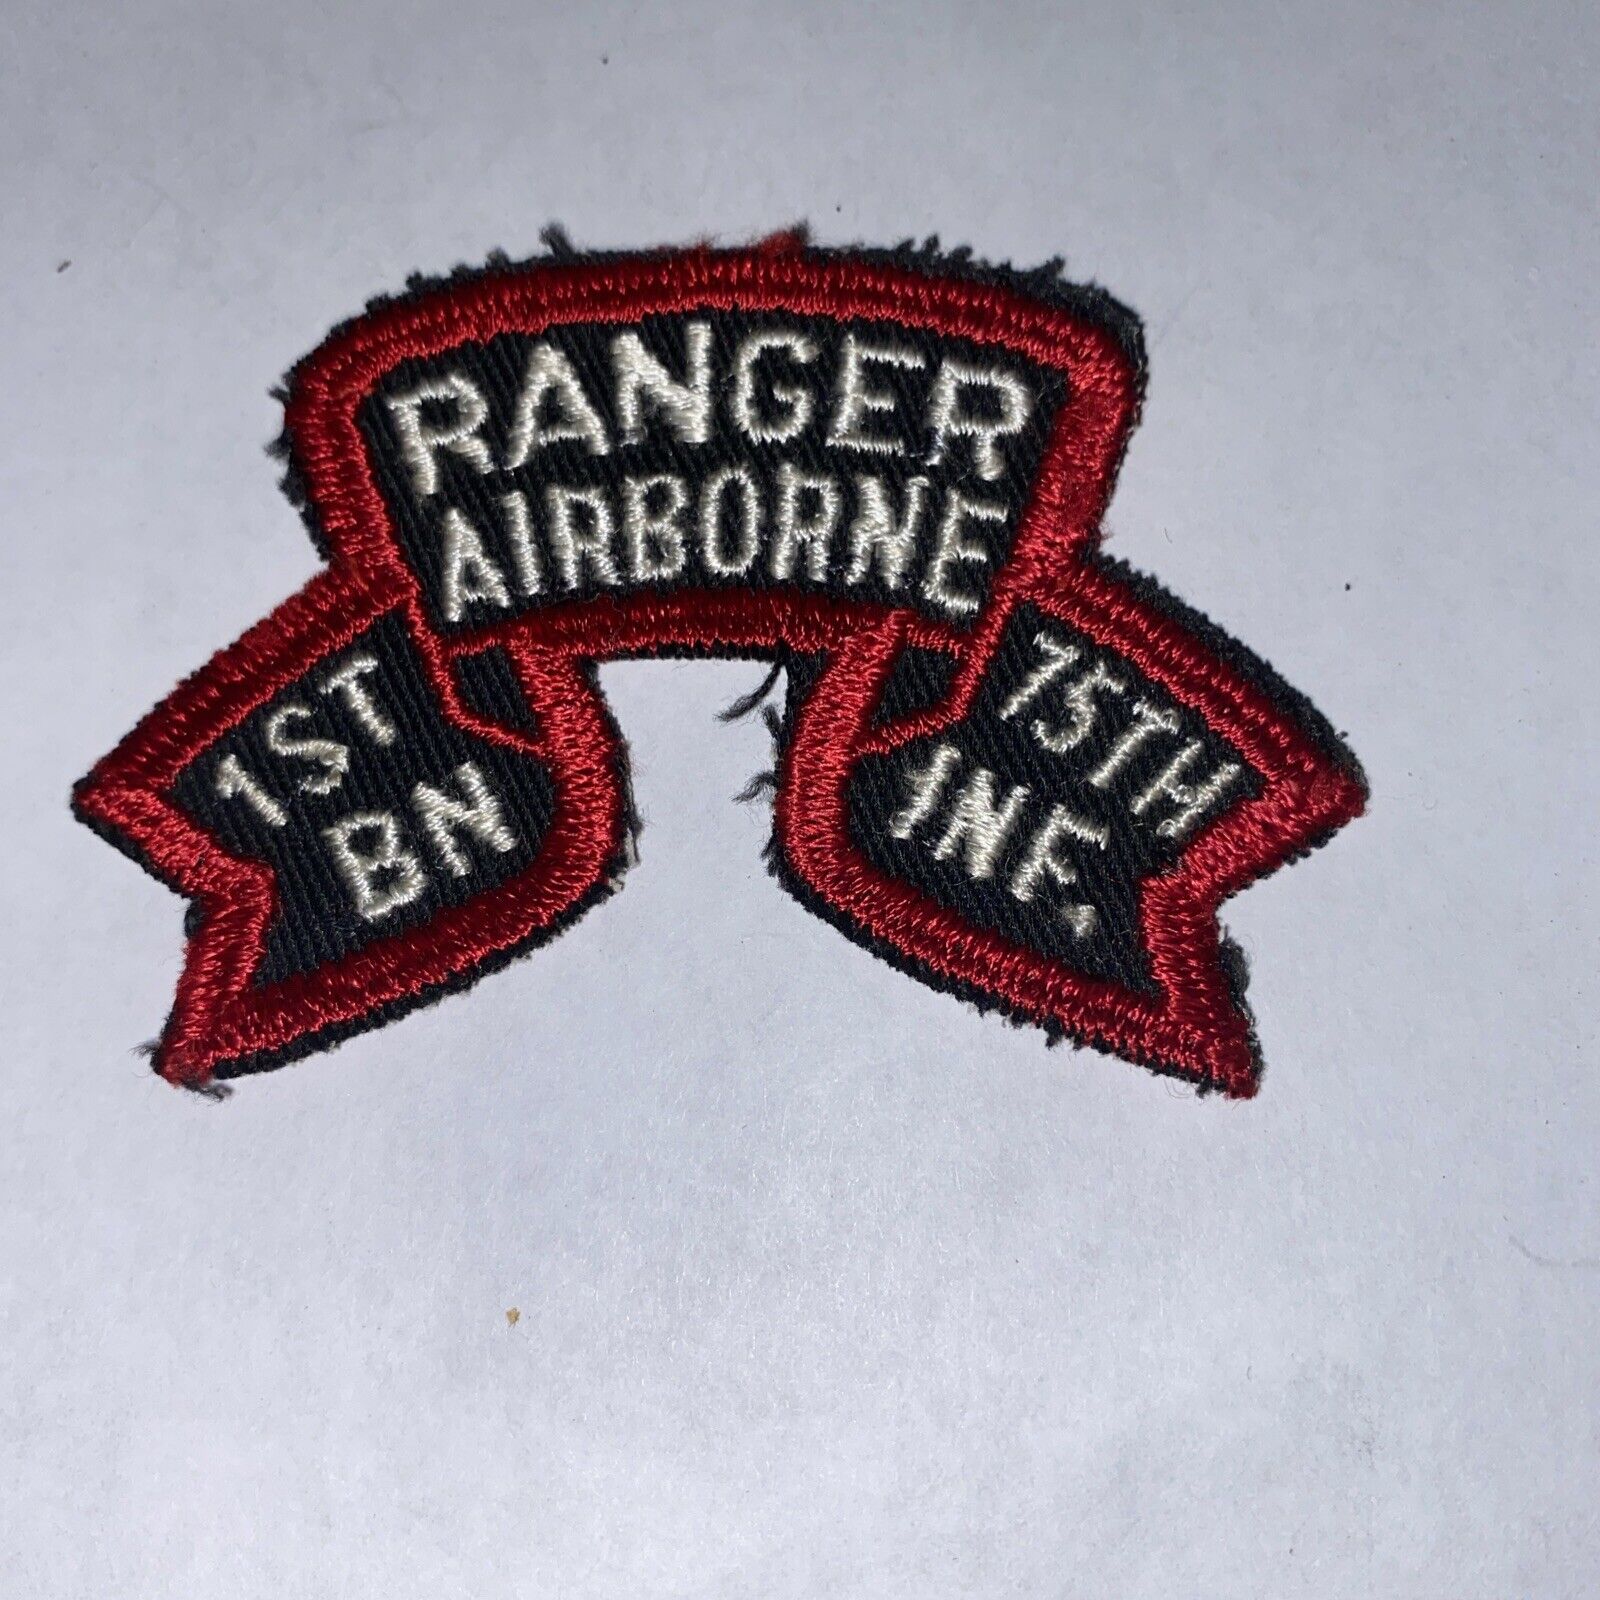 1980s Made Large Airborne Ranger Scroll 1st BN 75th Infantry Regt Large Patch